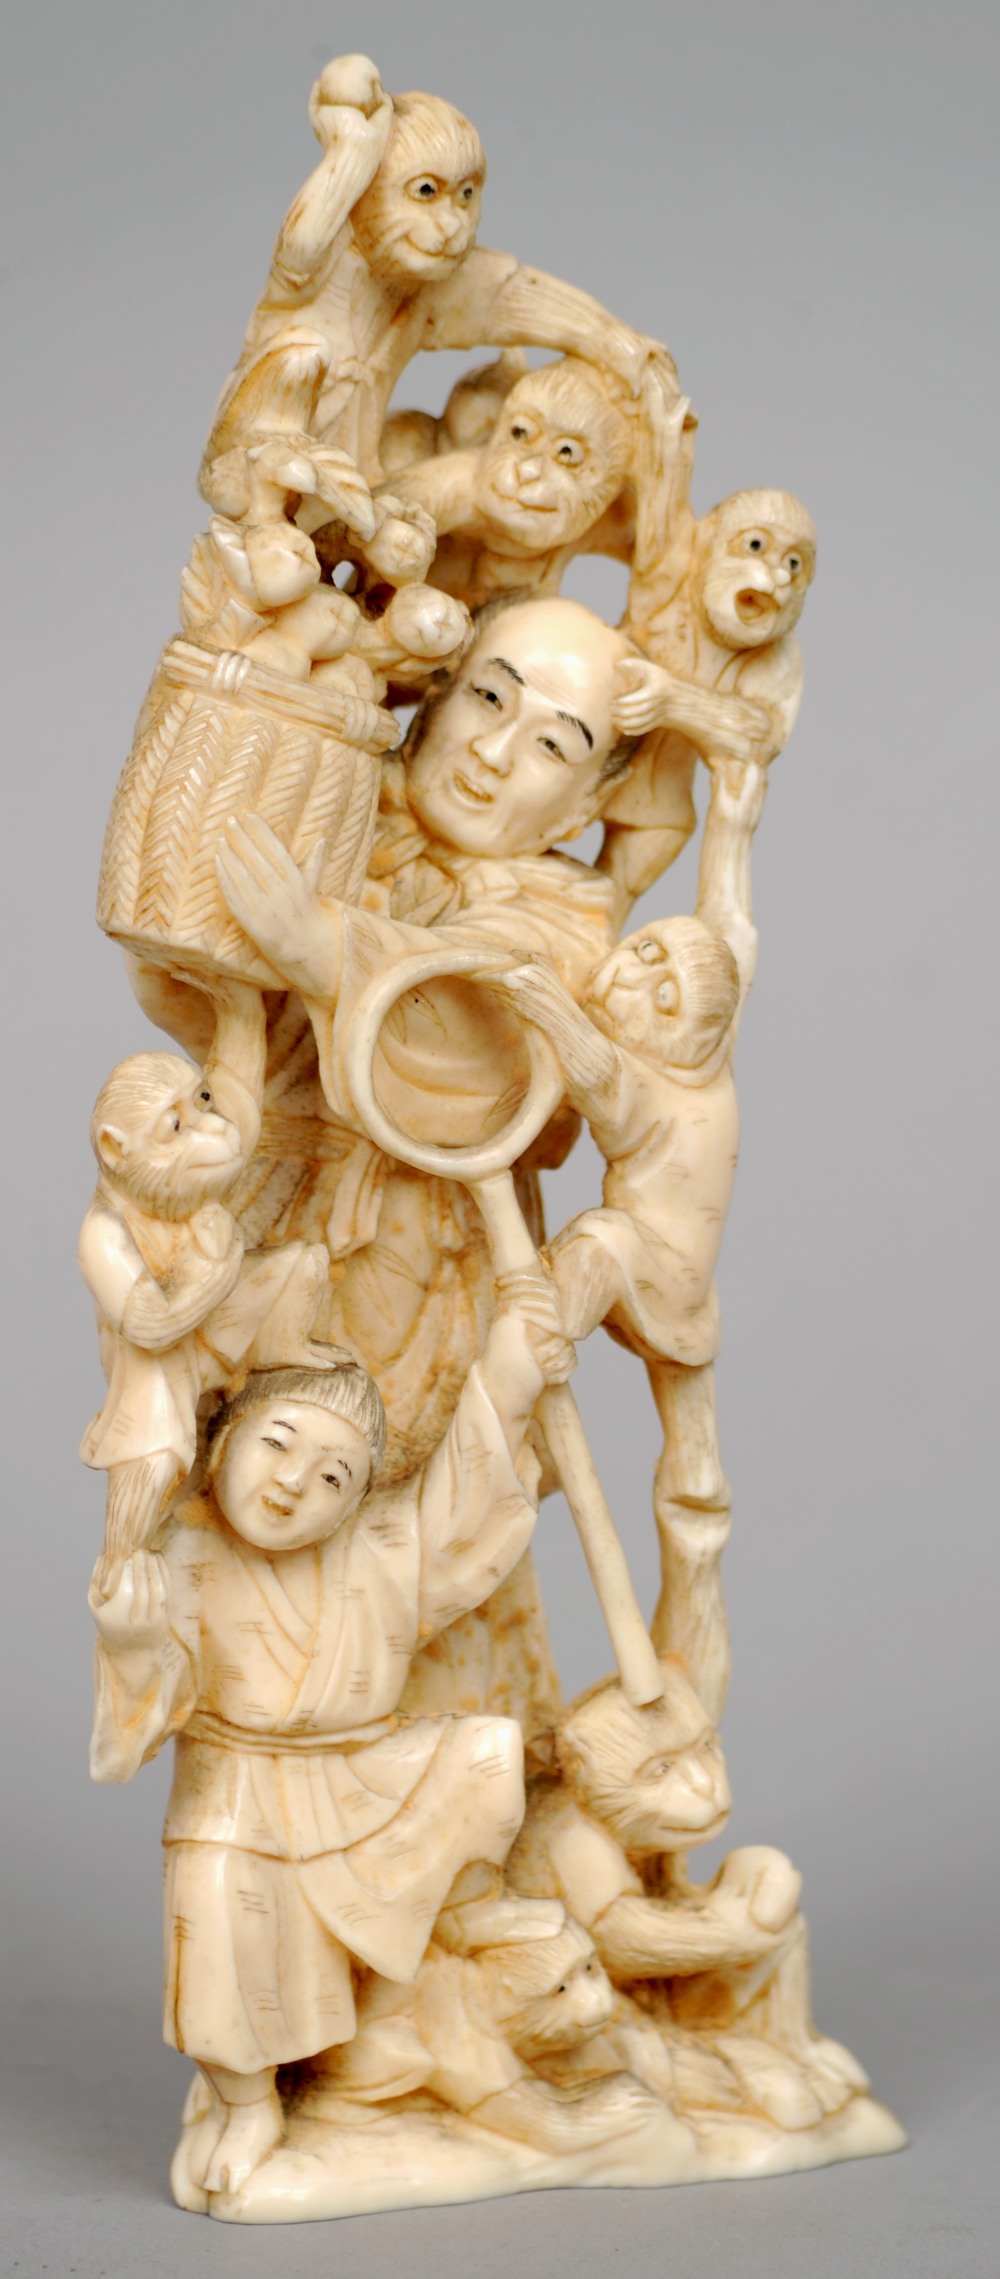 A 19th century Japanese carved ivory okimono
Formed as a fruit farmer and his son amongst playful